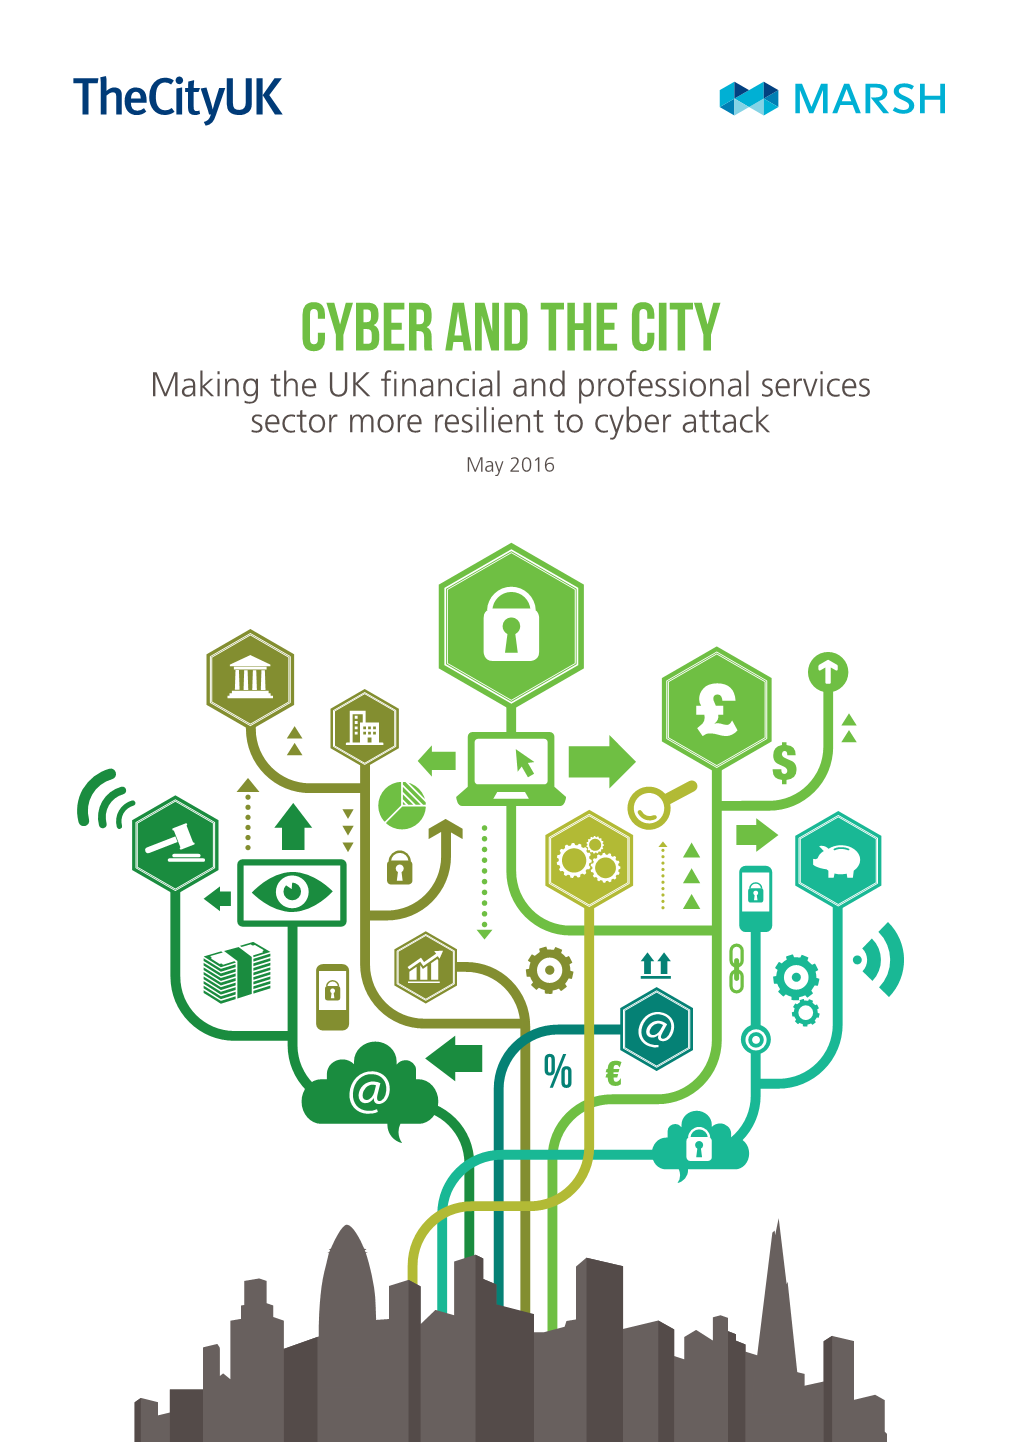 CYBER and the CITY Making the UK Financial and Professional Services Sector More Resilient to Cyber Attack May 2016